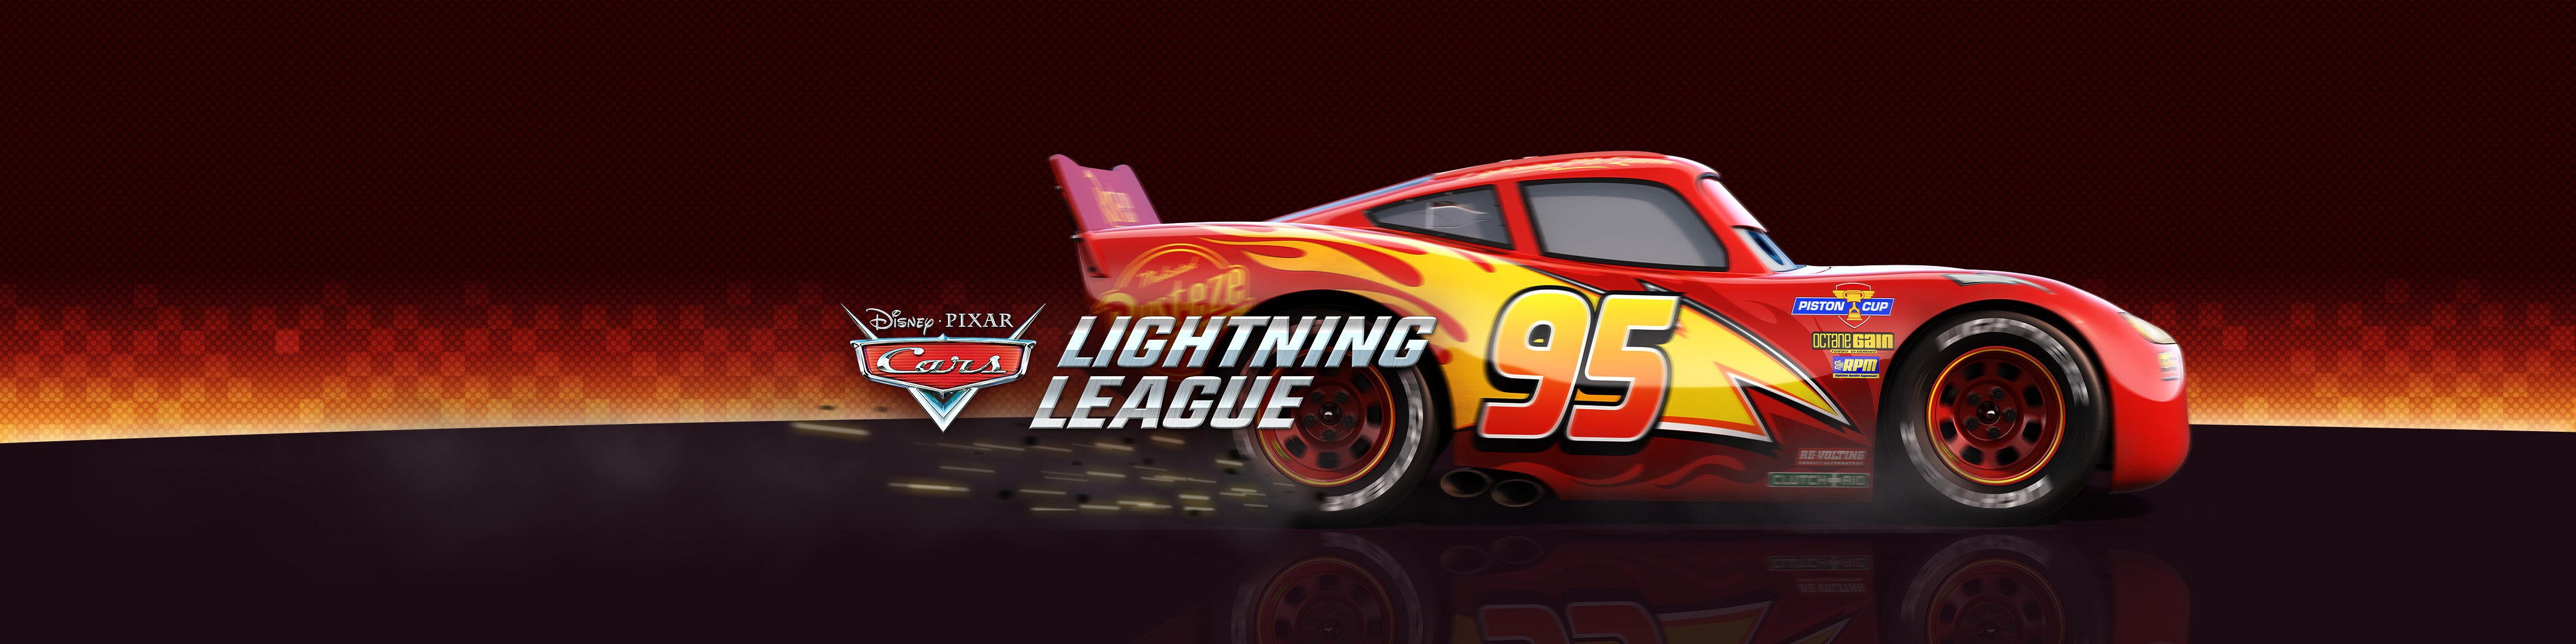 Disney•Pixar’s “Cars: Lightning League” now available for mobile devices